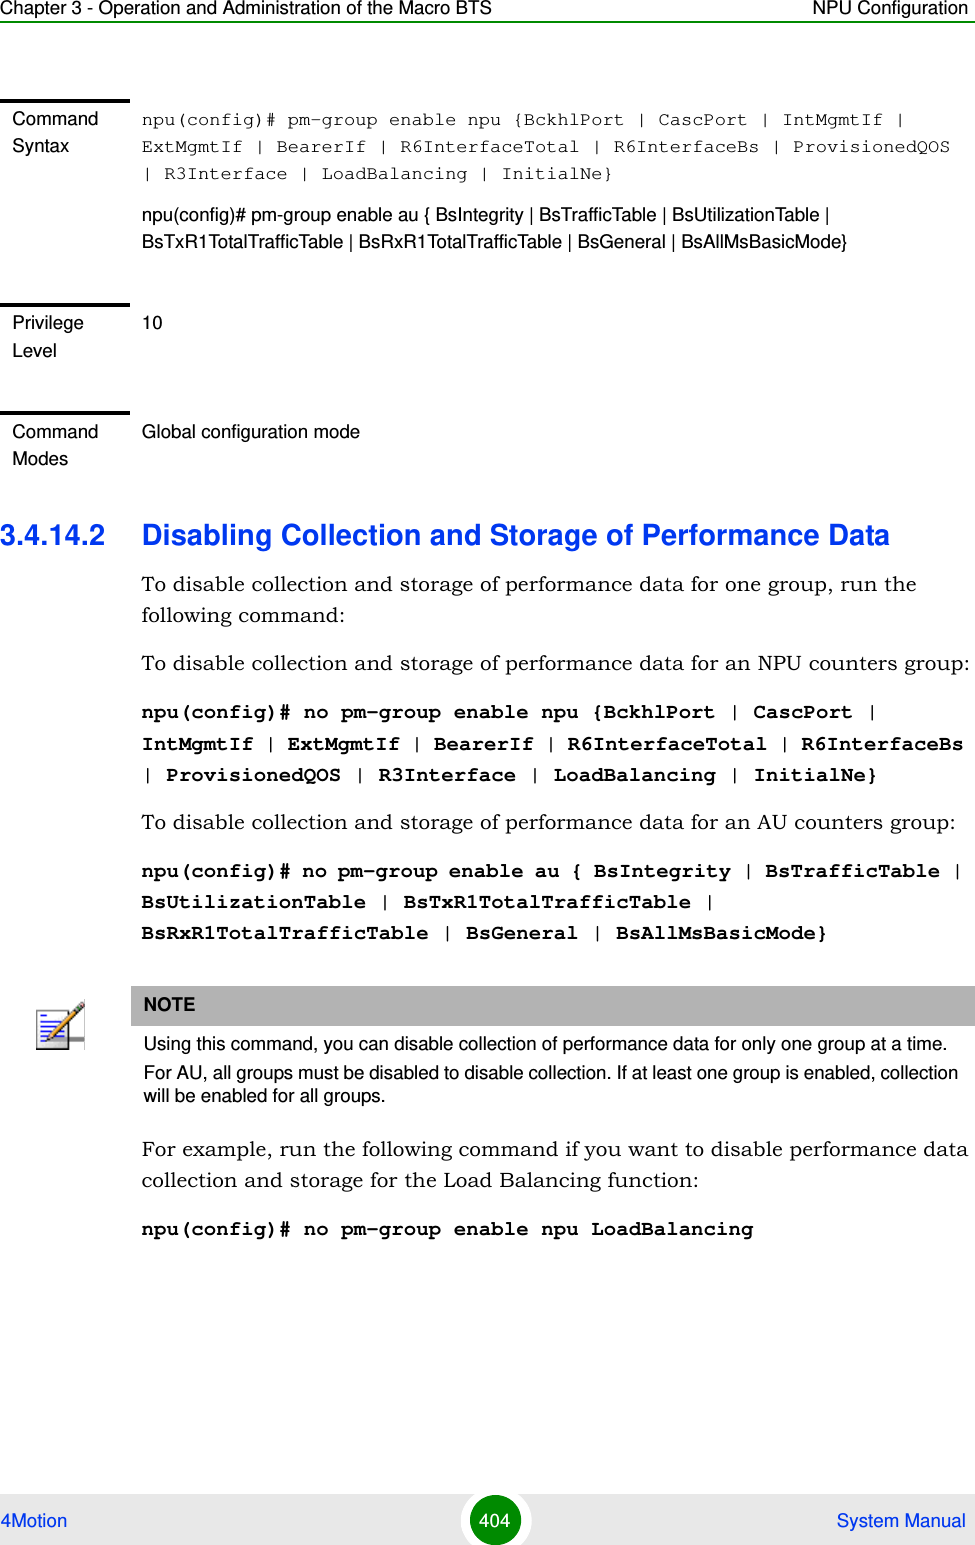 Chapter 3 - Operation and Administration of the Macro BTS NPU Configuration4Motion 404  System Manual3.4.14.2 Disabling Collection and Storage of Performance DataTo disable collection and storage of performance data for one group, run the following command:To disable collection and storage of performance data for an NPU counters group:npu(config)# no pm-group enable npu {BckhlPort | CascPort | IntMgmtIf | ExtMgmtIf | BearerIf | R6InterfaceTotal | R6InterfaceBs | ProvisionedQOS | R3Interface | LoadBalancing | InitialNe}To disable collection and storage of performance data for an AU counters group:npu(config)# no pm-group enable au { BsIntegrity | BsTrafficTable | BsUtilizationTable | BsTxR1TotalTrafficTable | BsRxR1TotalTrafficTable | BsGeneral | BsAllMsBasicMode}For example, run the following command if you want to disable performance data collection and storage for the Load Balancing function:npu(config)# no pm-group enable npu LoadBalancingCommand Syntaxnpu(config)# pm-group enable npu {BckhlPort | CascPort | IntMgmtIf | ExtMgmtIf | BearerIf | R6InterfaceTotal | R6InterfaceBs | ProvisionedQOS | R3Interface | LoadBalancing | InitialNe}npu(config)# pm-group enable au { BsIntegrity | BsTrafficTable | BsUtilizationTable | BsTxR1TotalTrafficTable | BsRxR1TotalTrafficTable | BsGeneral | BsAllMsBasicMode}Privilege Level10Command ModesGlobal configuration modeNOTEUsing this command, you can disable collection of performance data for only one group at a time.For AU, all groups must be disabled to disable collection. If at least one group is enabled, collection will be enabled for all groups. 